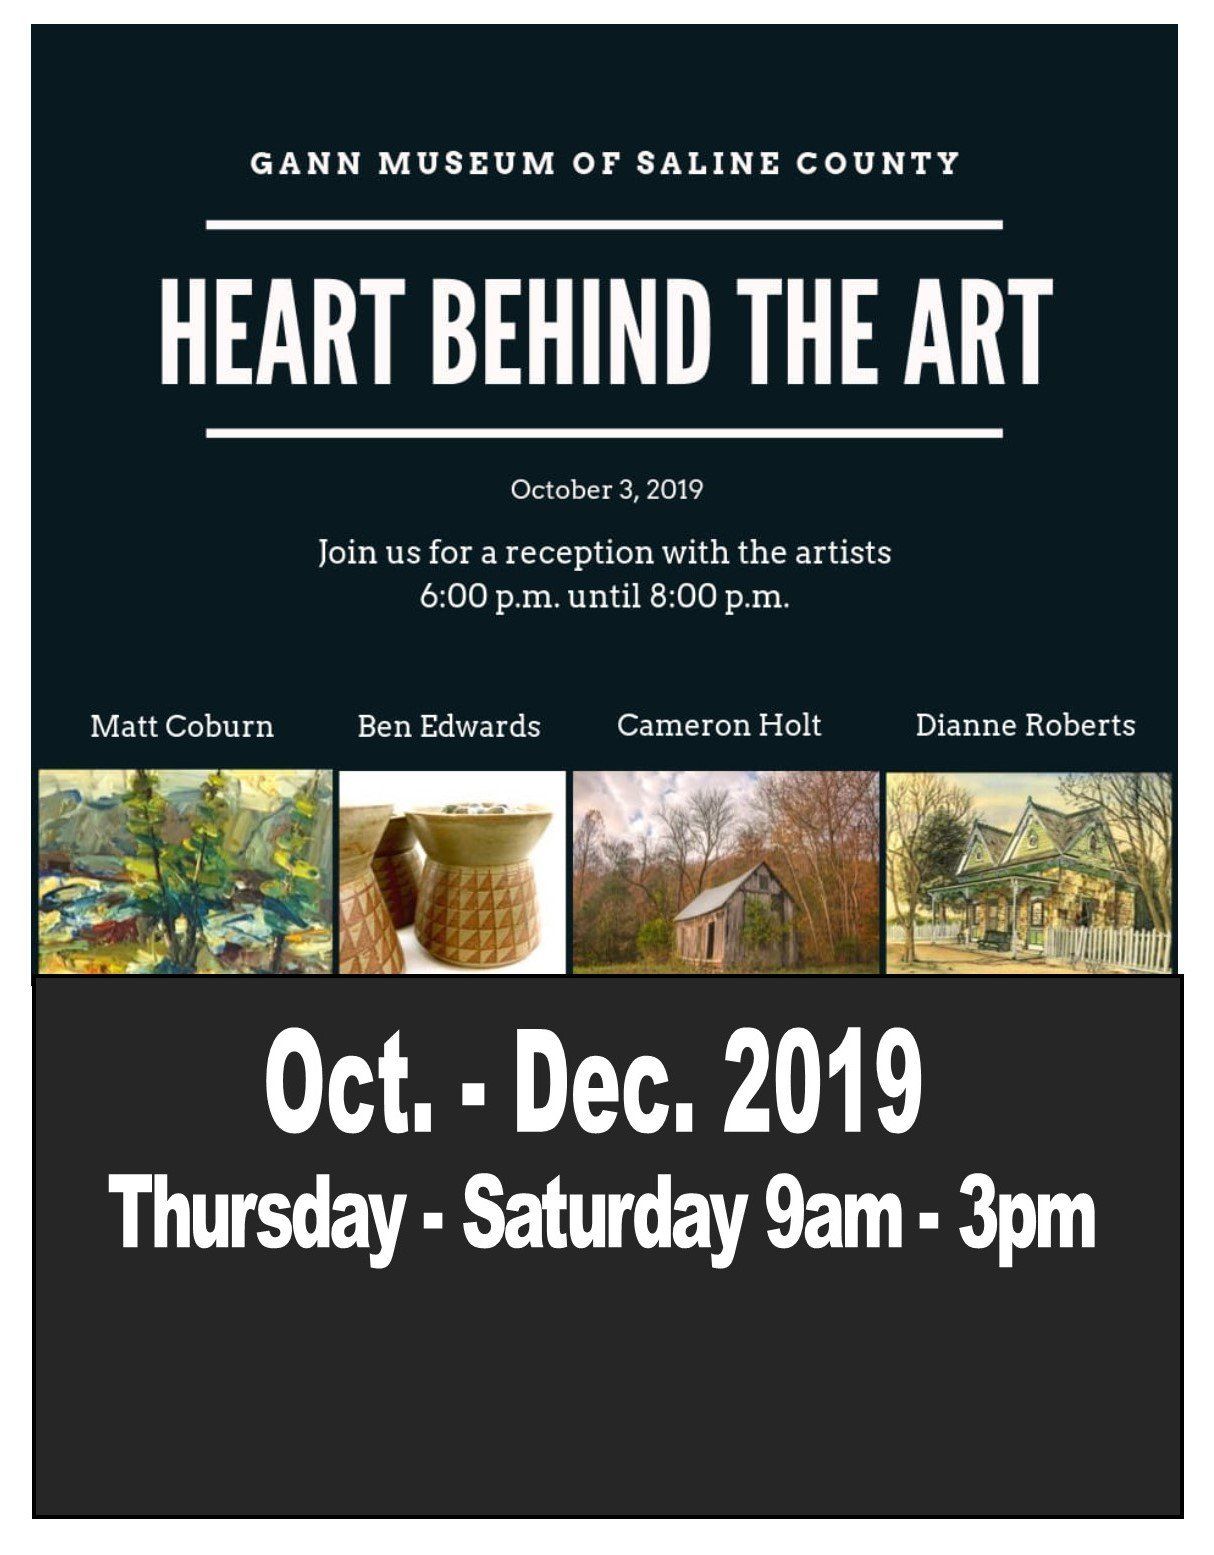 Flyer for heart behind the art event at gann museum of saline county